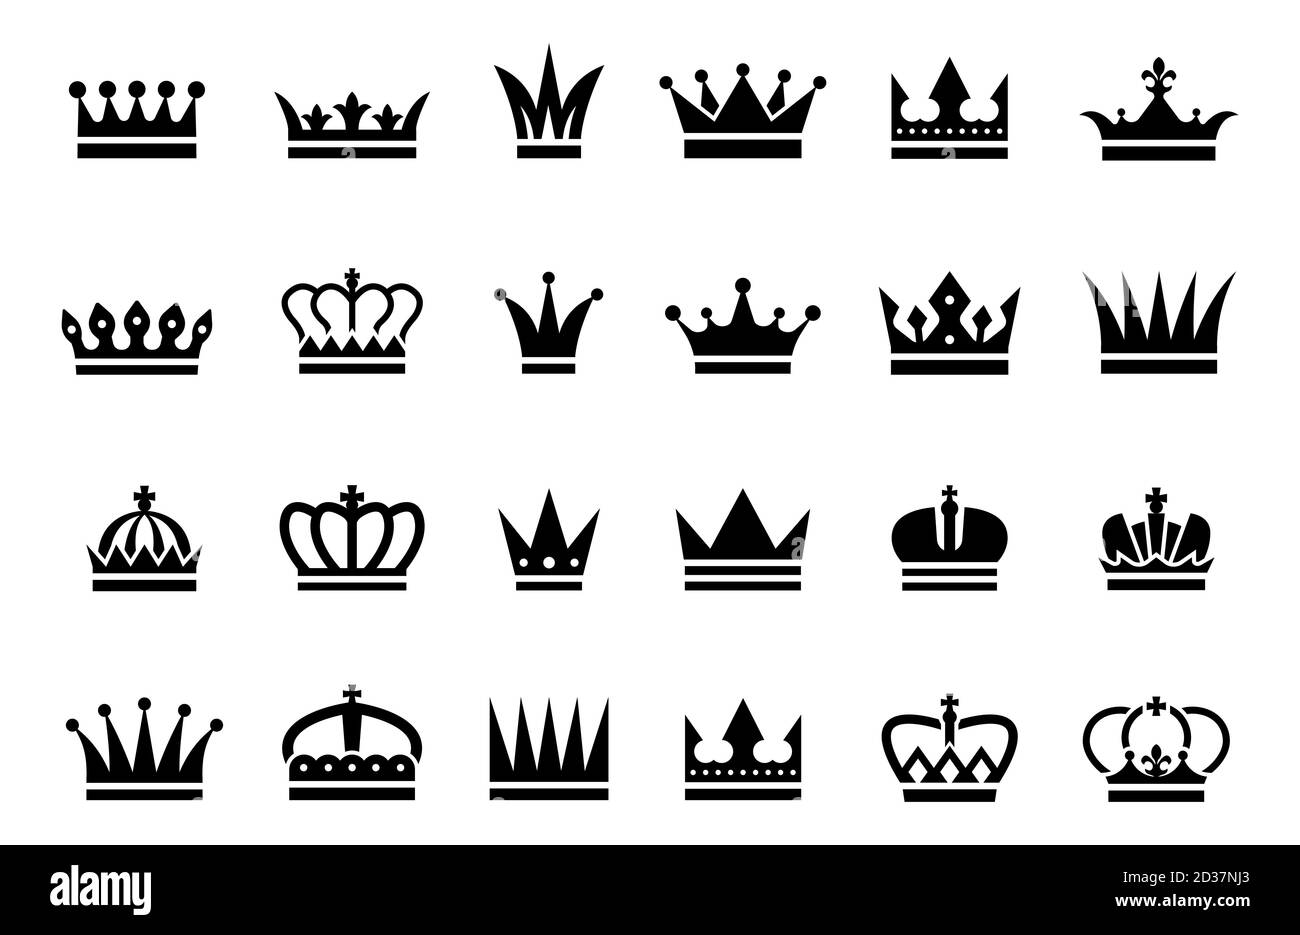 Black crown icons. Vector different crown silhouettes isolated on white background Stock Vector